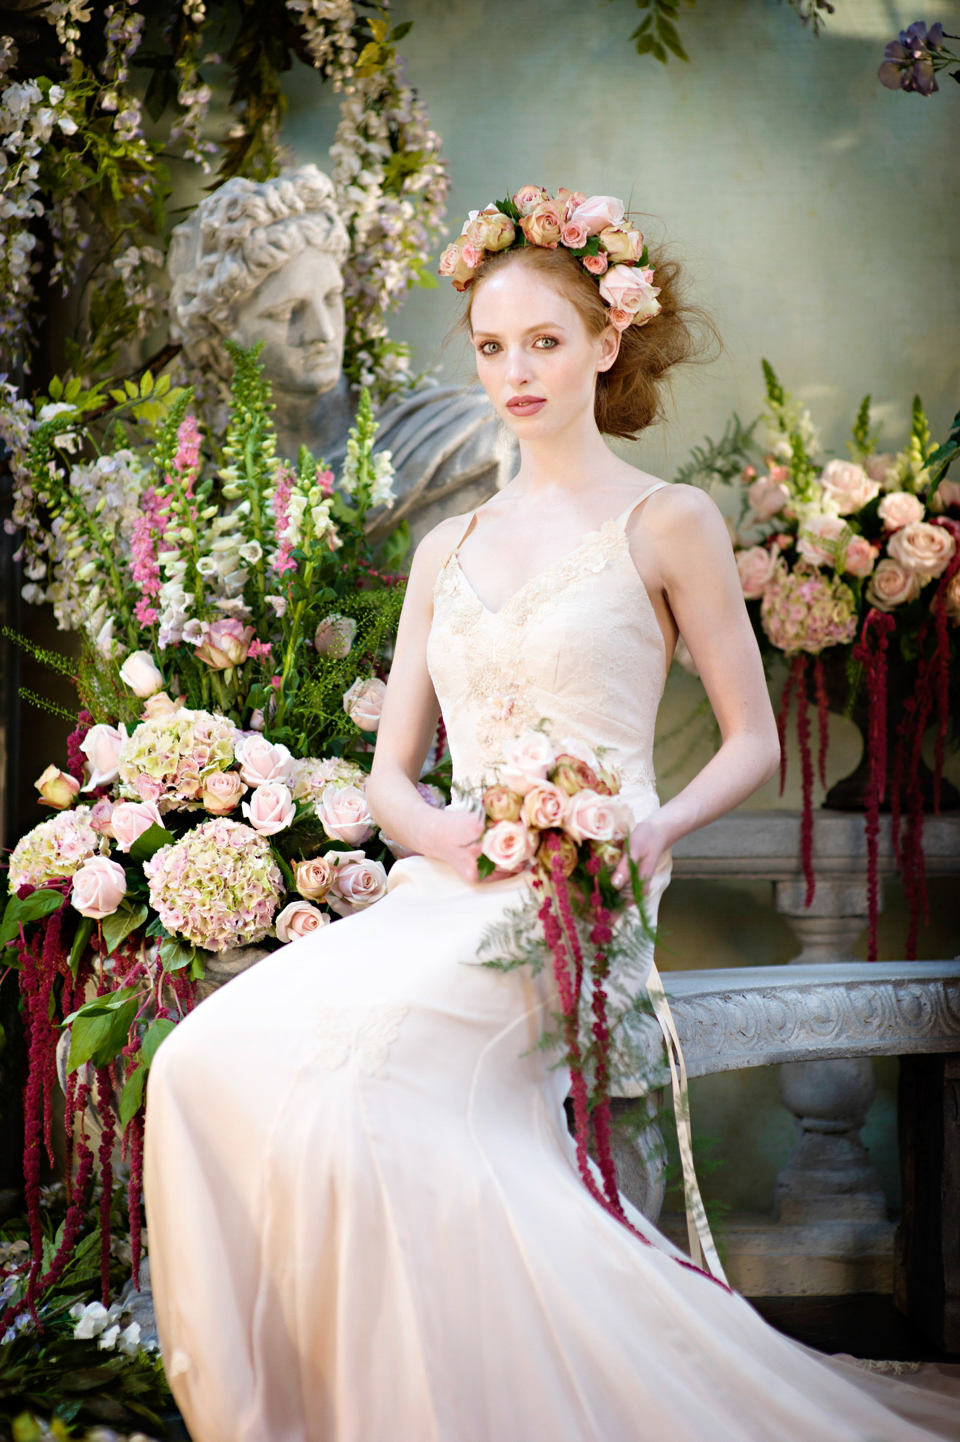 Whisper Wedding Dress from Terry Fox's Siren Song Collection